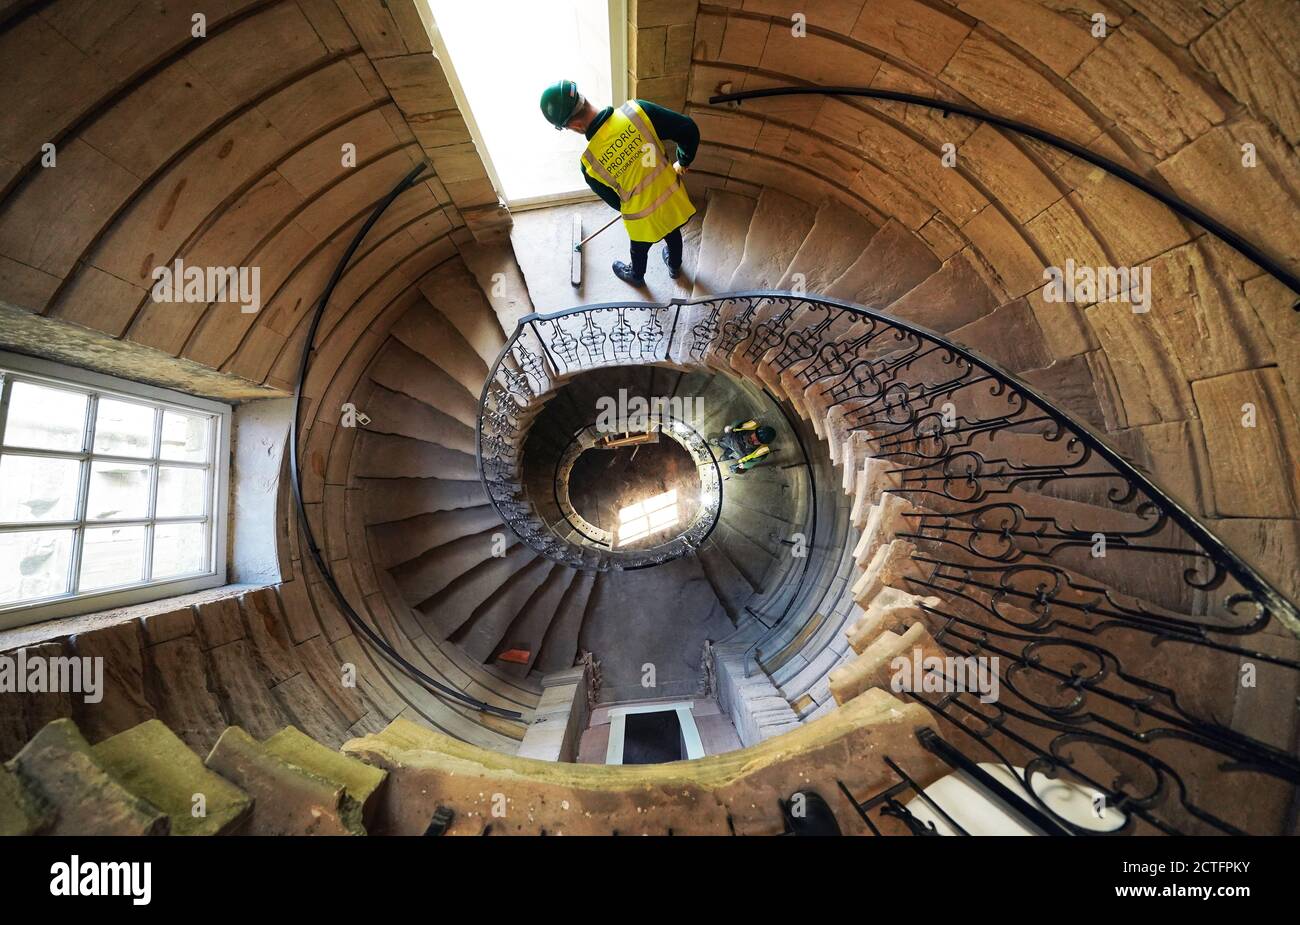 Workers on the east spiral staircase which sits one end of the Central Hall at the National Trust's Seaton Delaval Hall in Northumberland, which has undergone restoration after still bearing scars from a fire dating back to 1822. Stock Photo